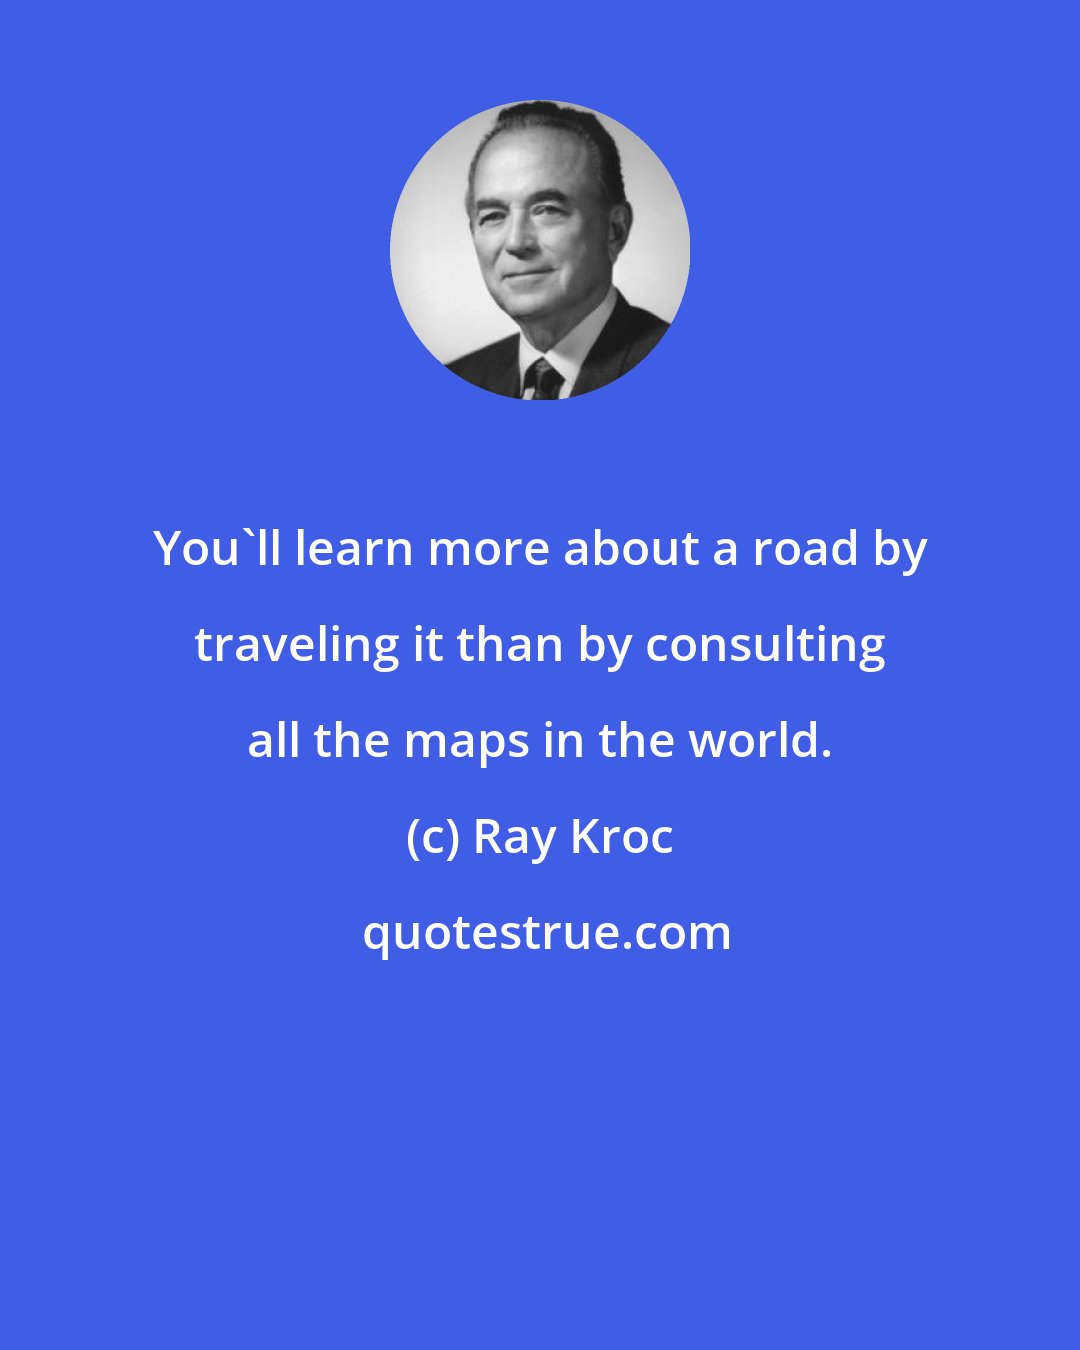 Ray Kroc: You'll learn more about a road by traveling it than by consulting all the maps in the world.